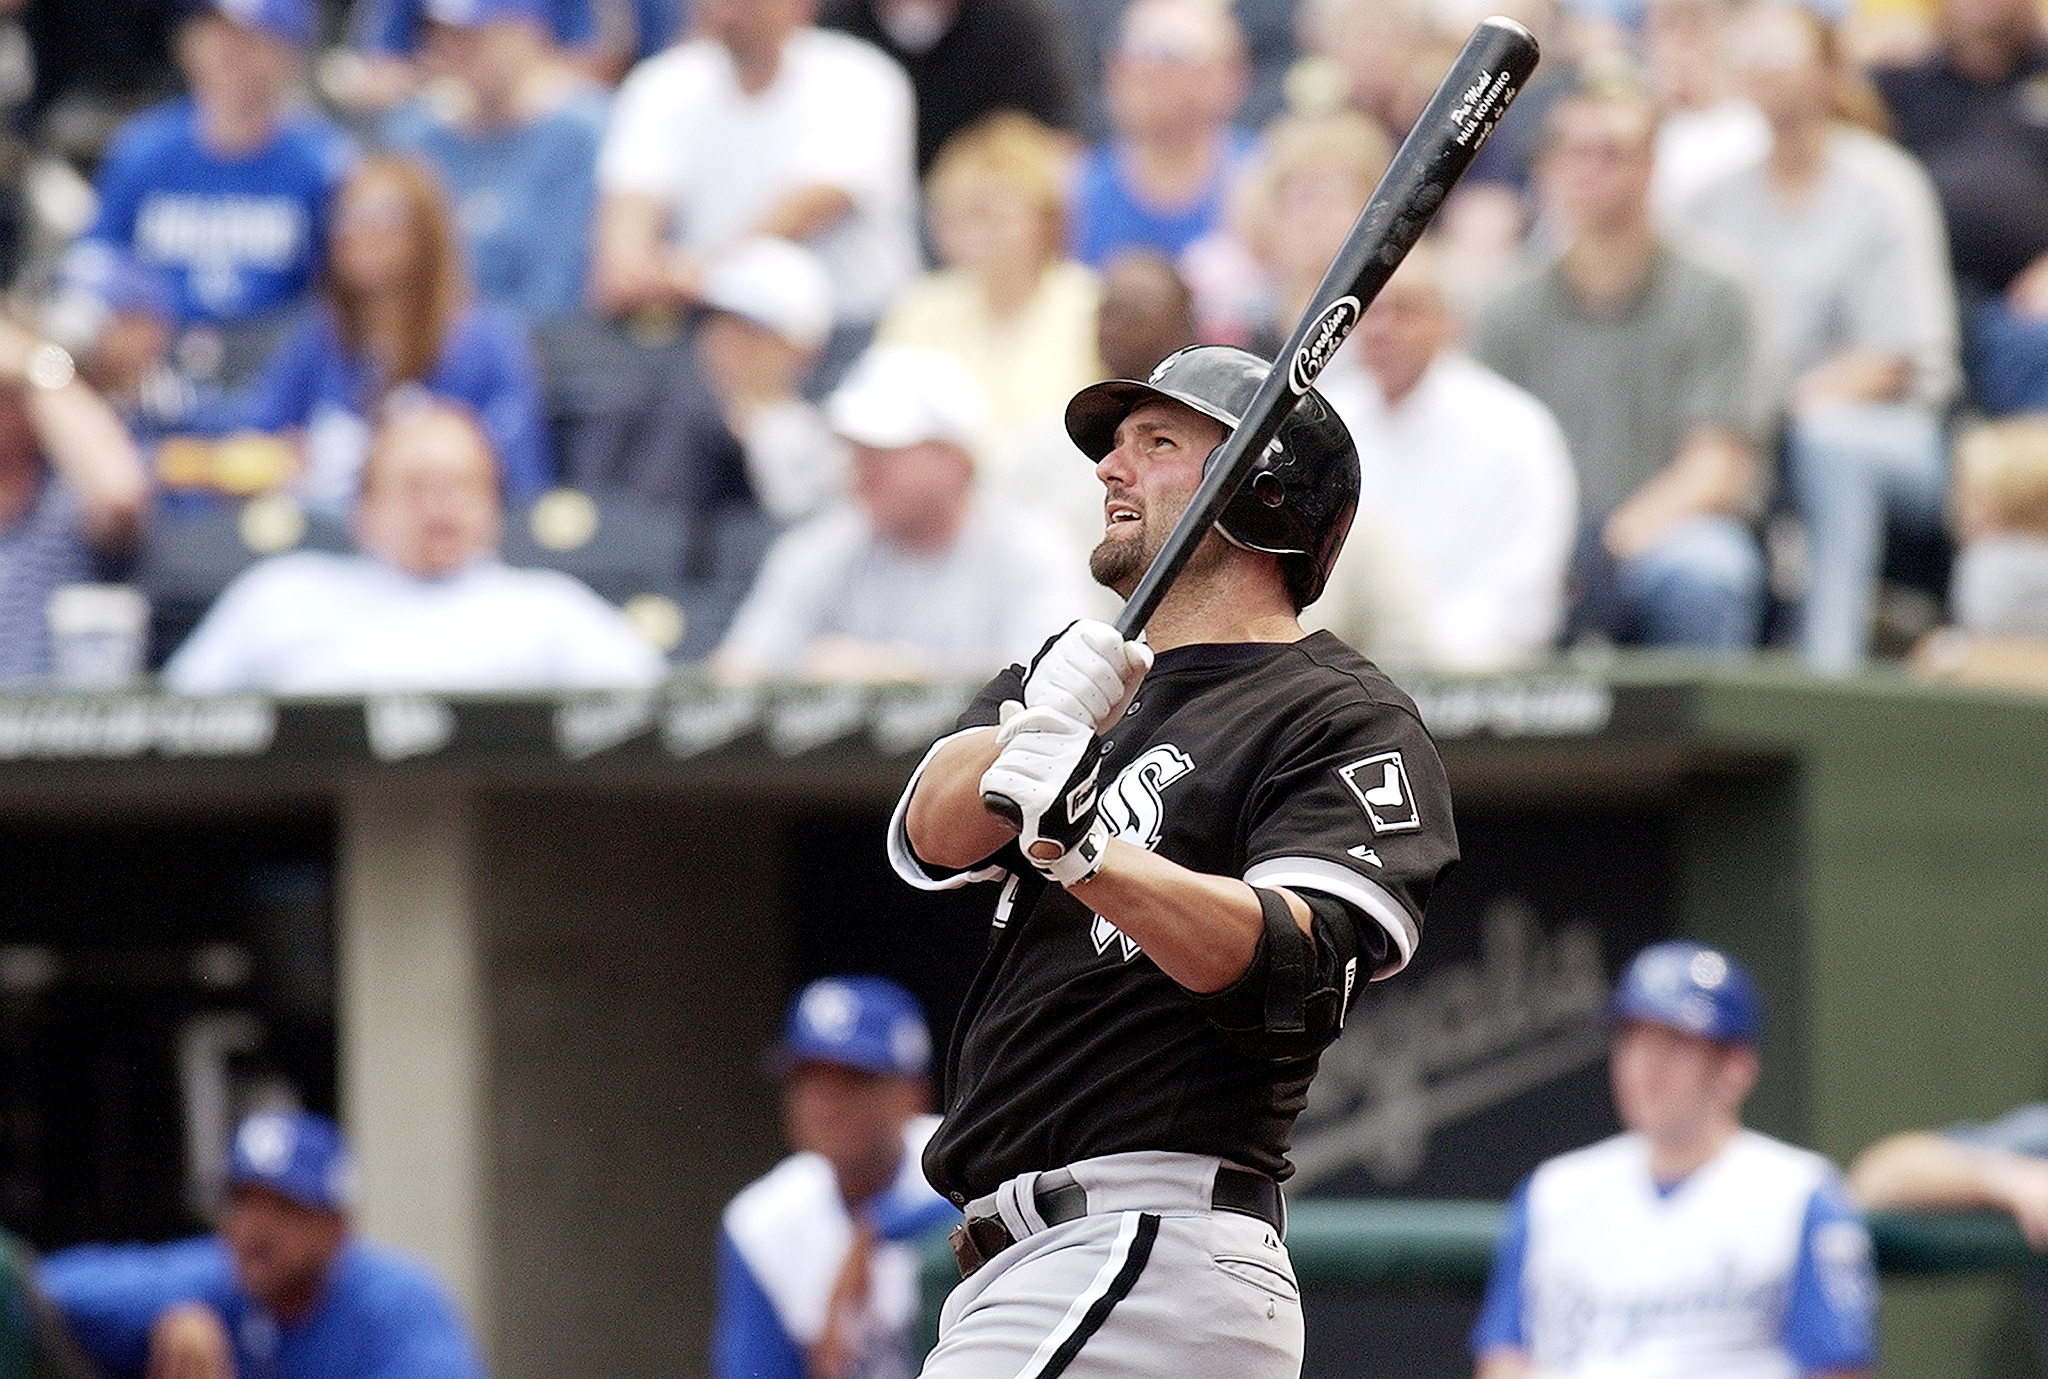 Paul Konerko is at peace with retirement, but his children need convincing  - NBC Sports